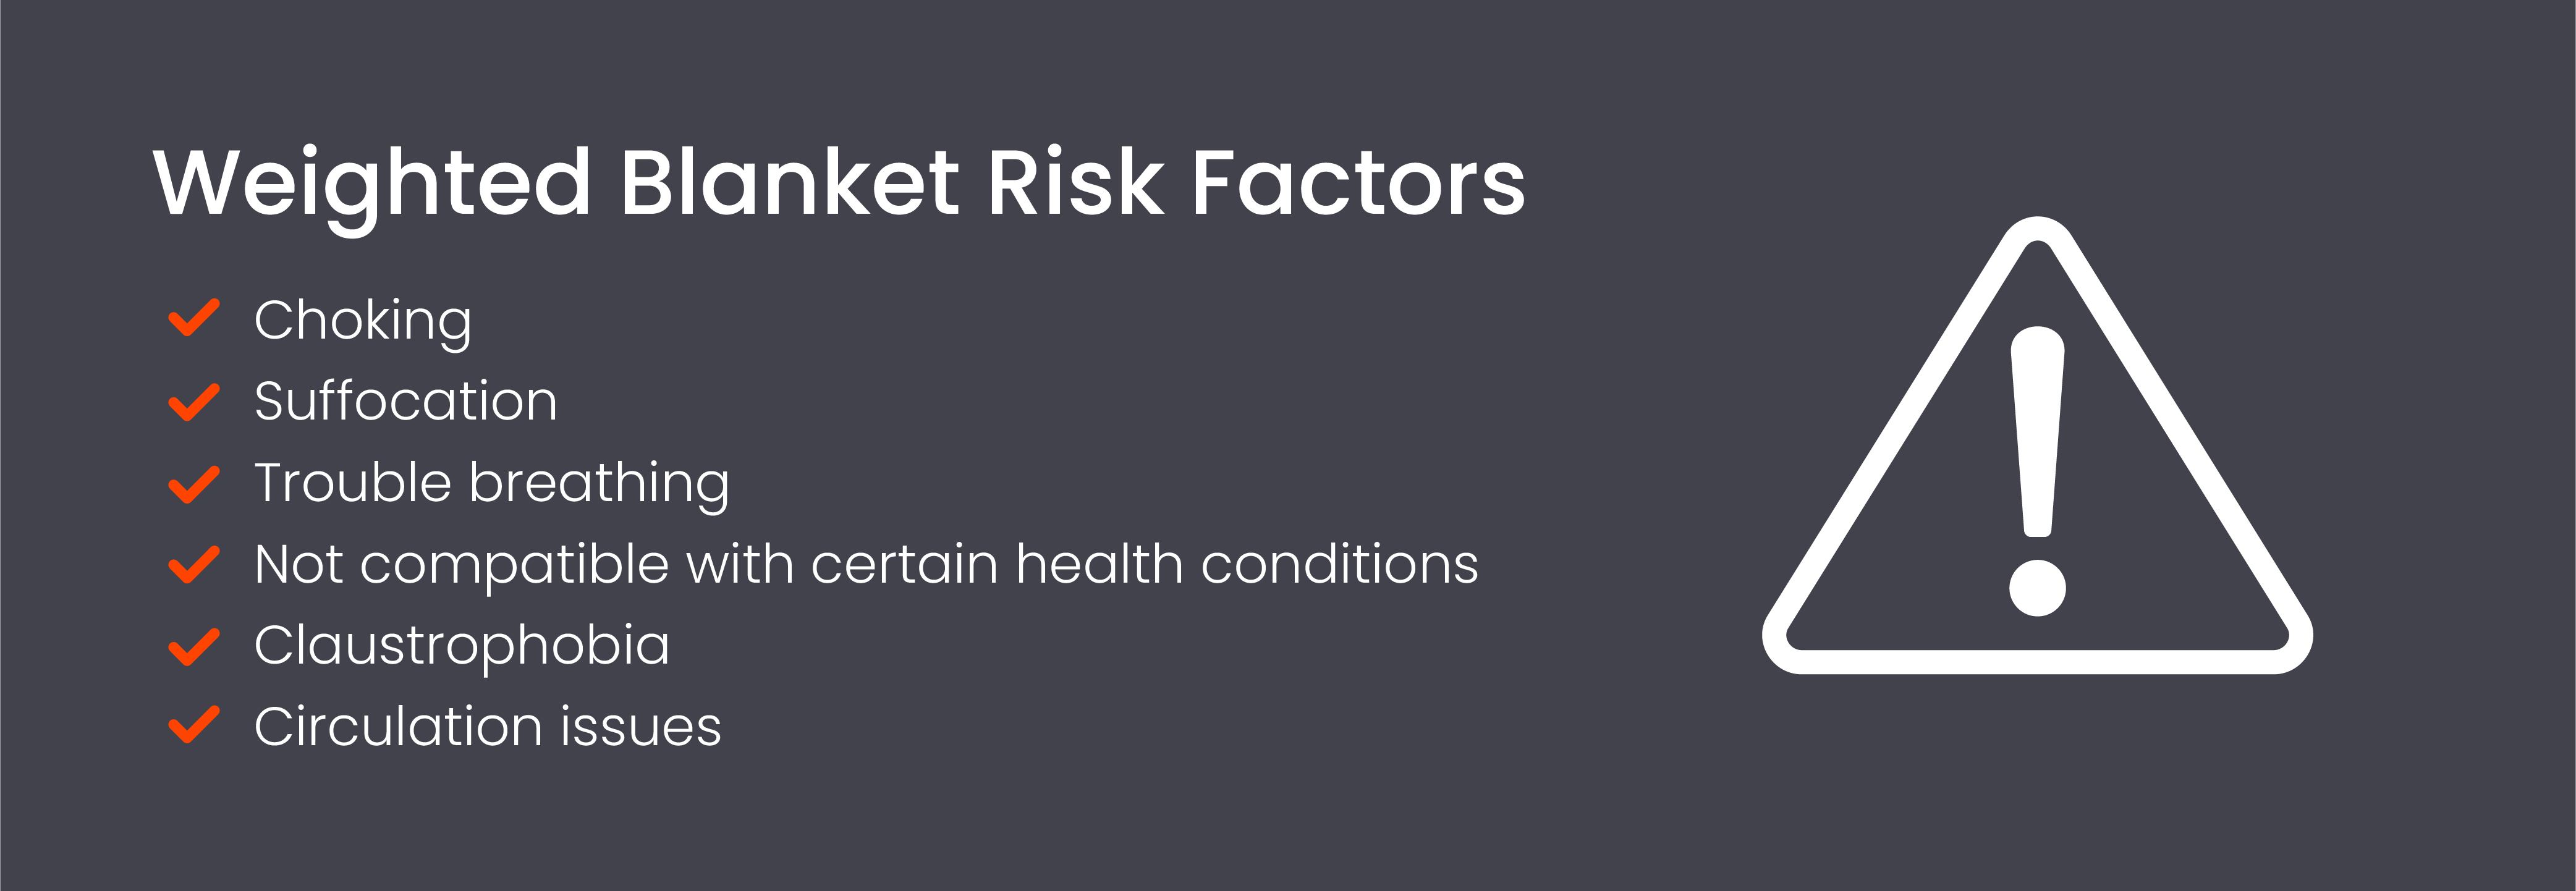 Weighted blanket risk factors